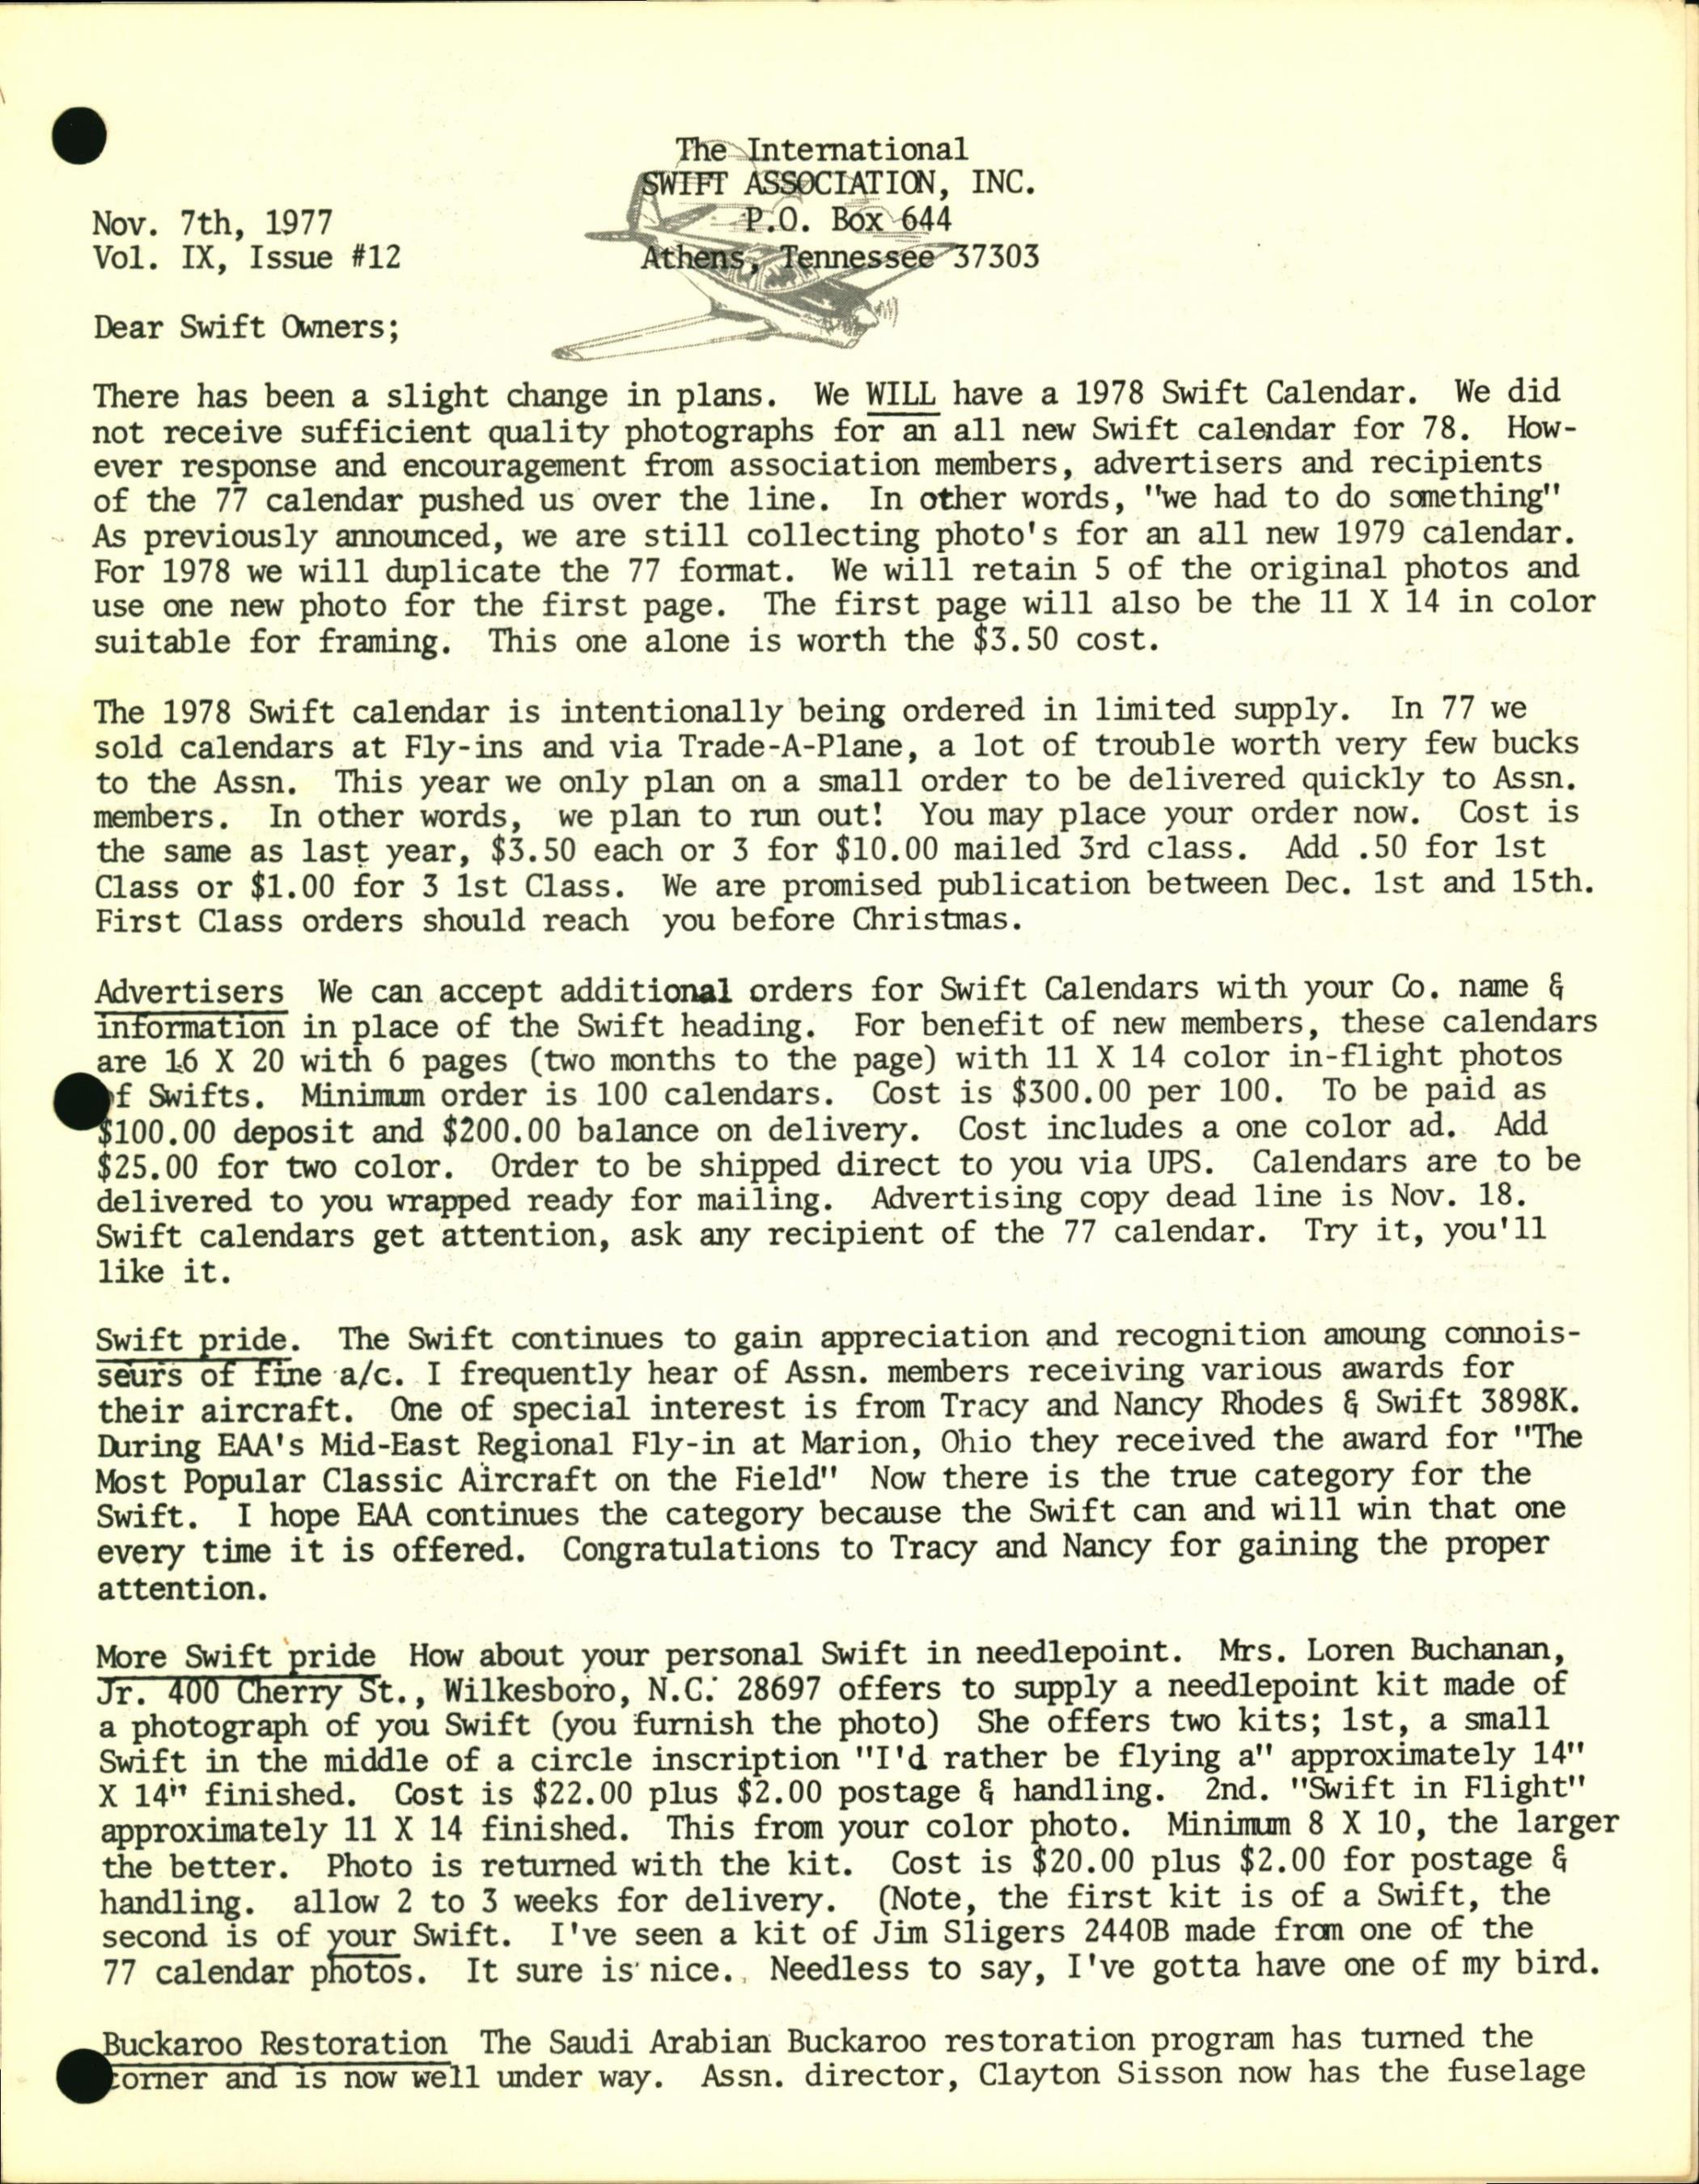 Sample page 1 from AirCorps Library document: November 1977